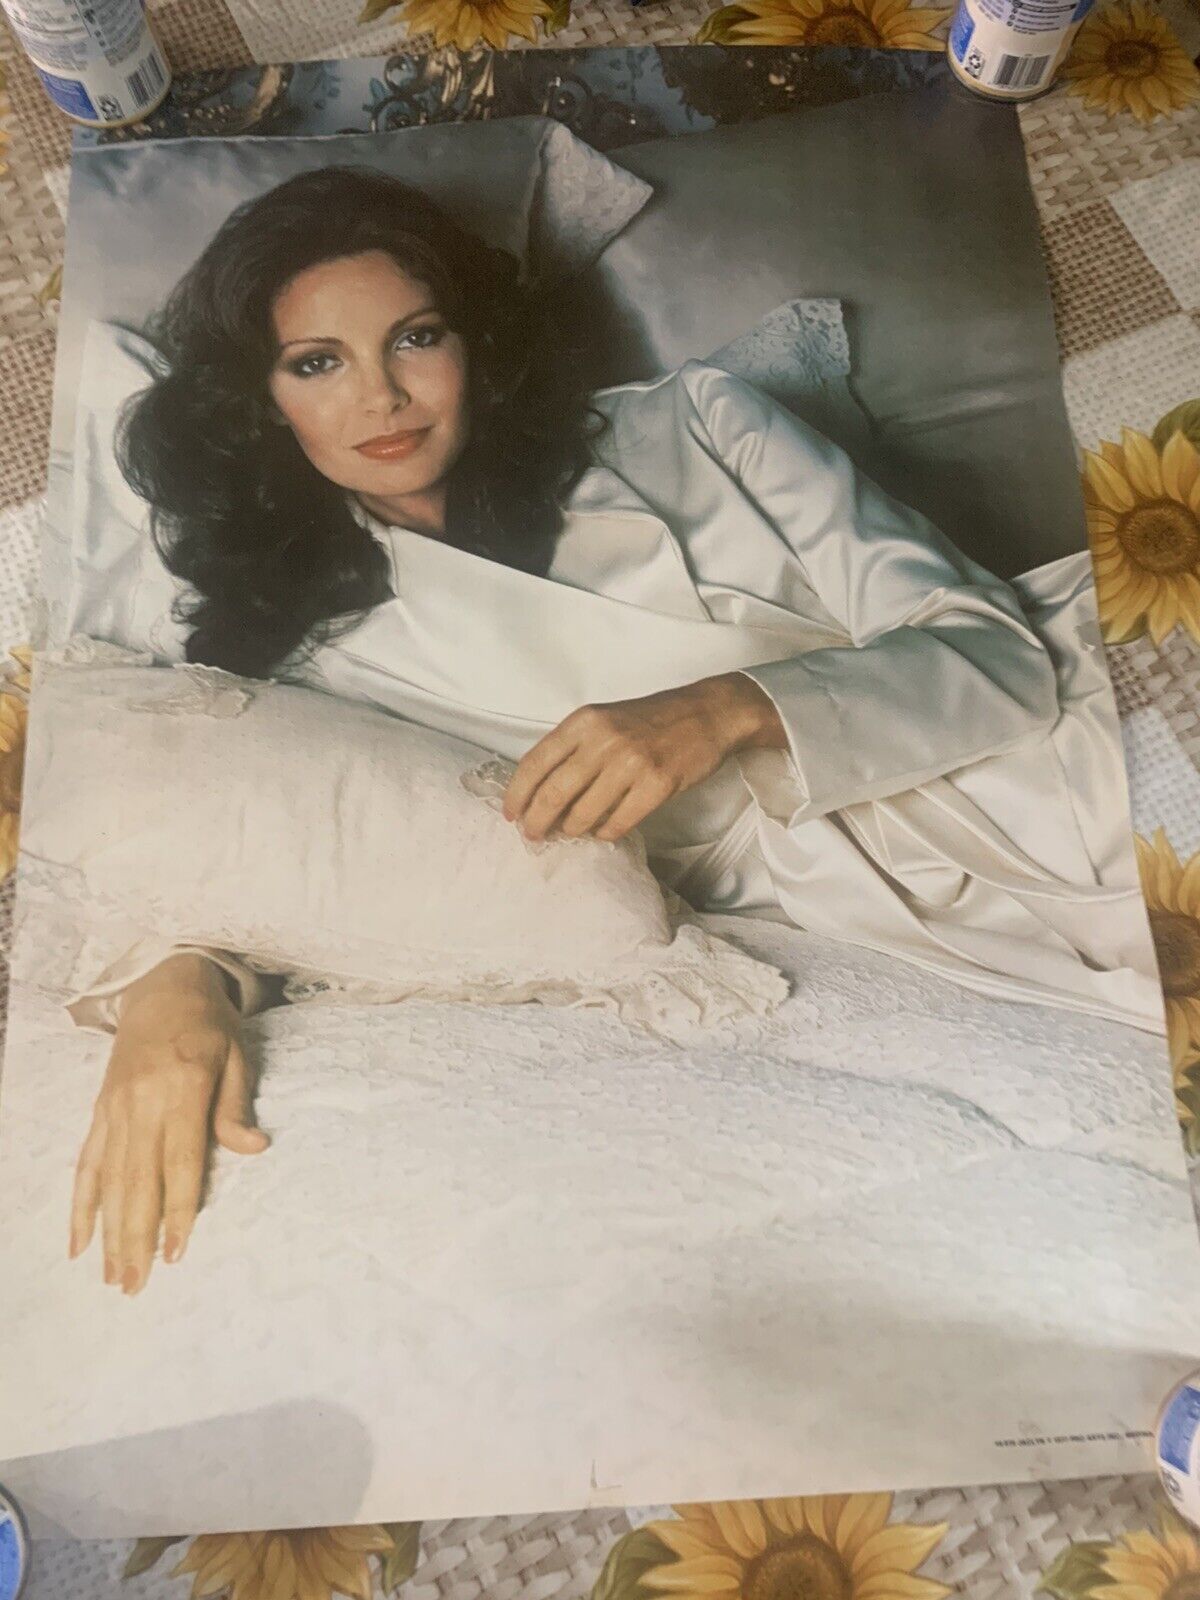 Jaclyn Smith Original 1977 Pin Up Charlie's Angels Poster 14-515 Pro Arts Inc.